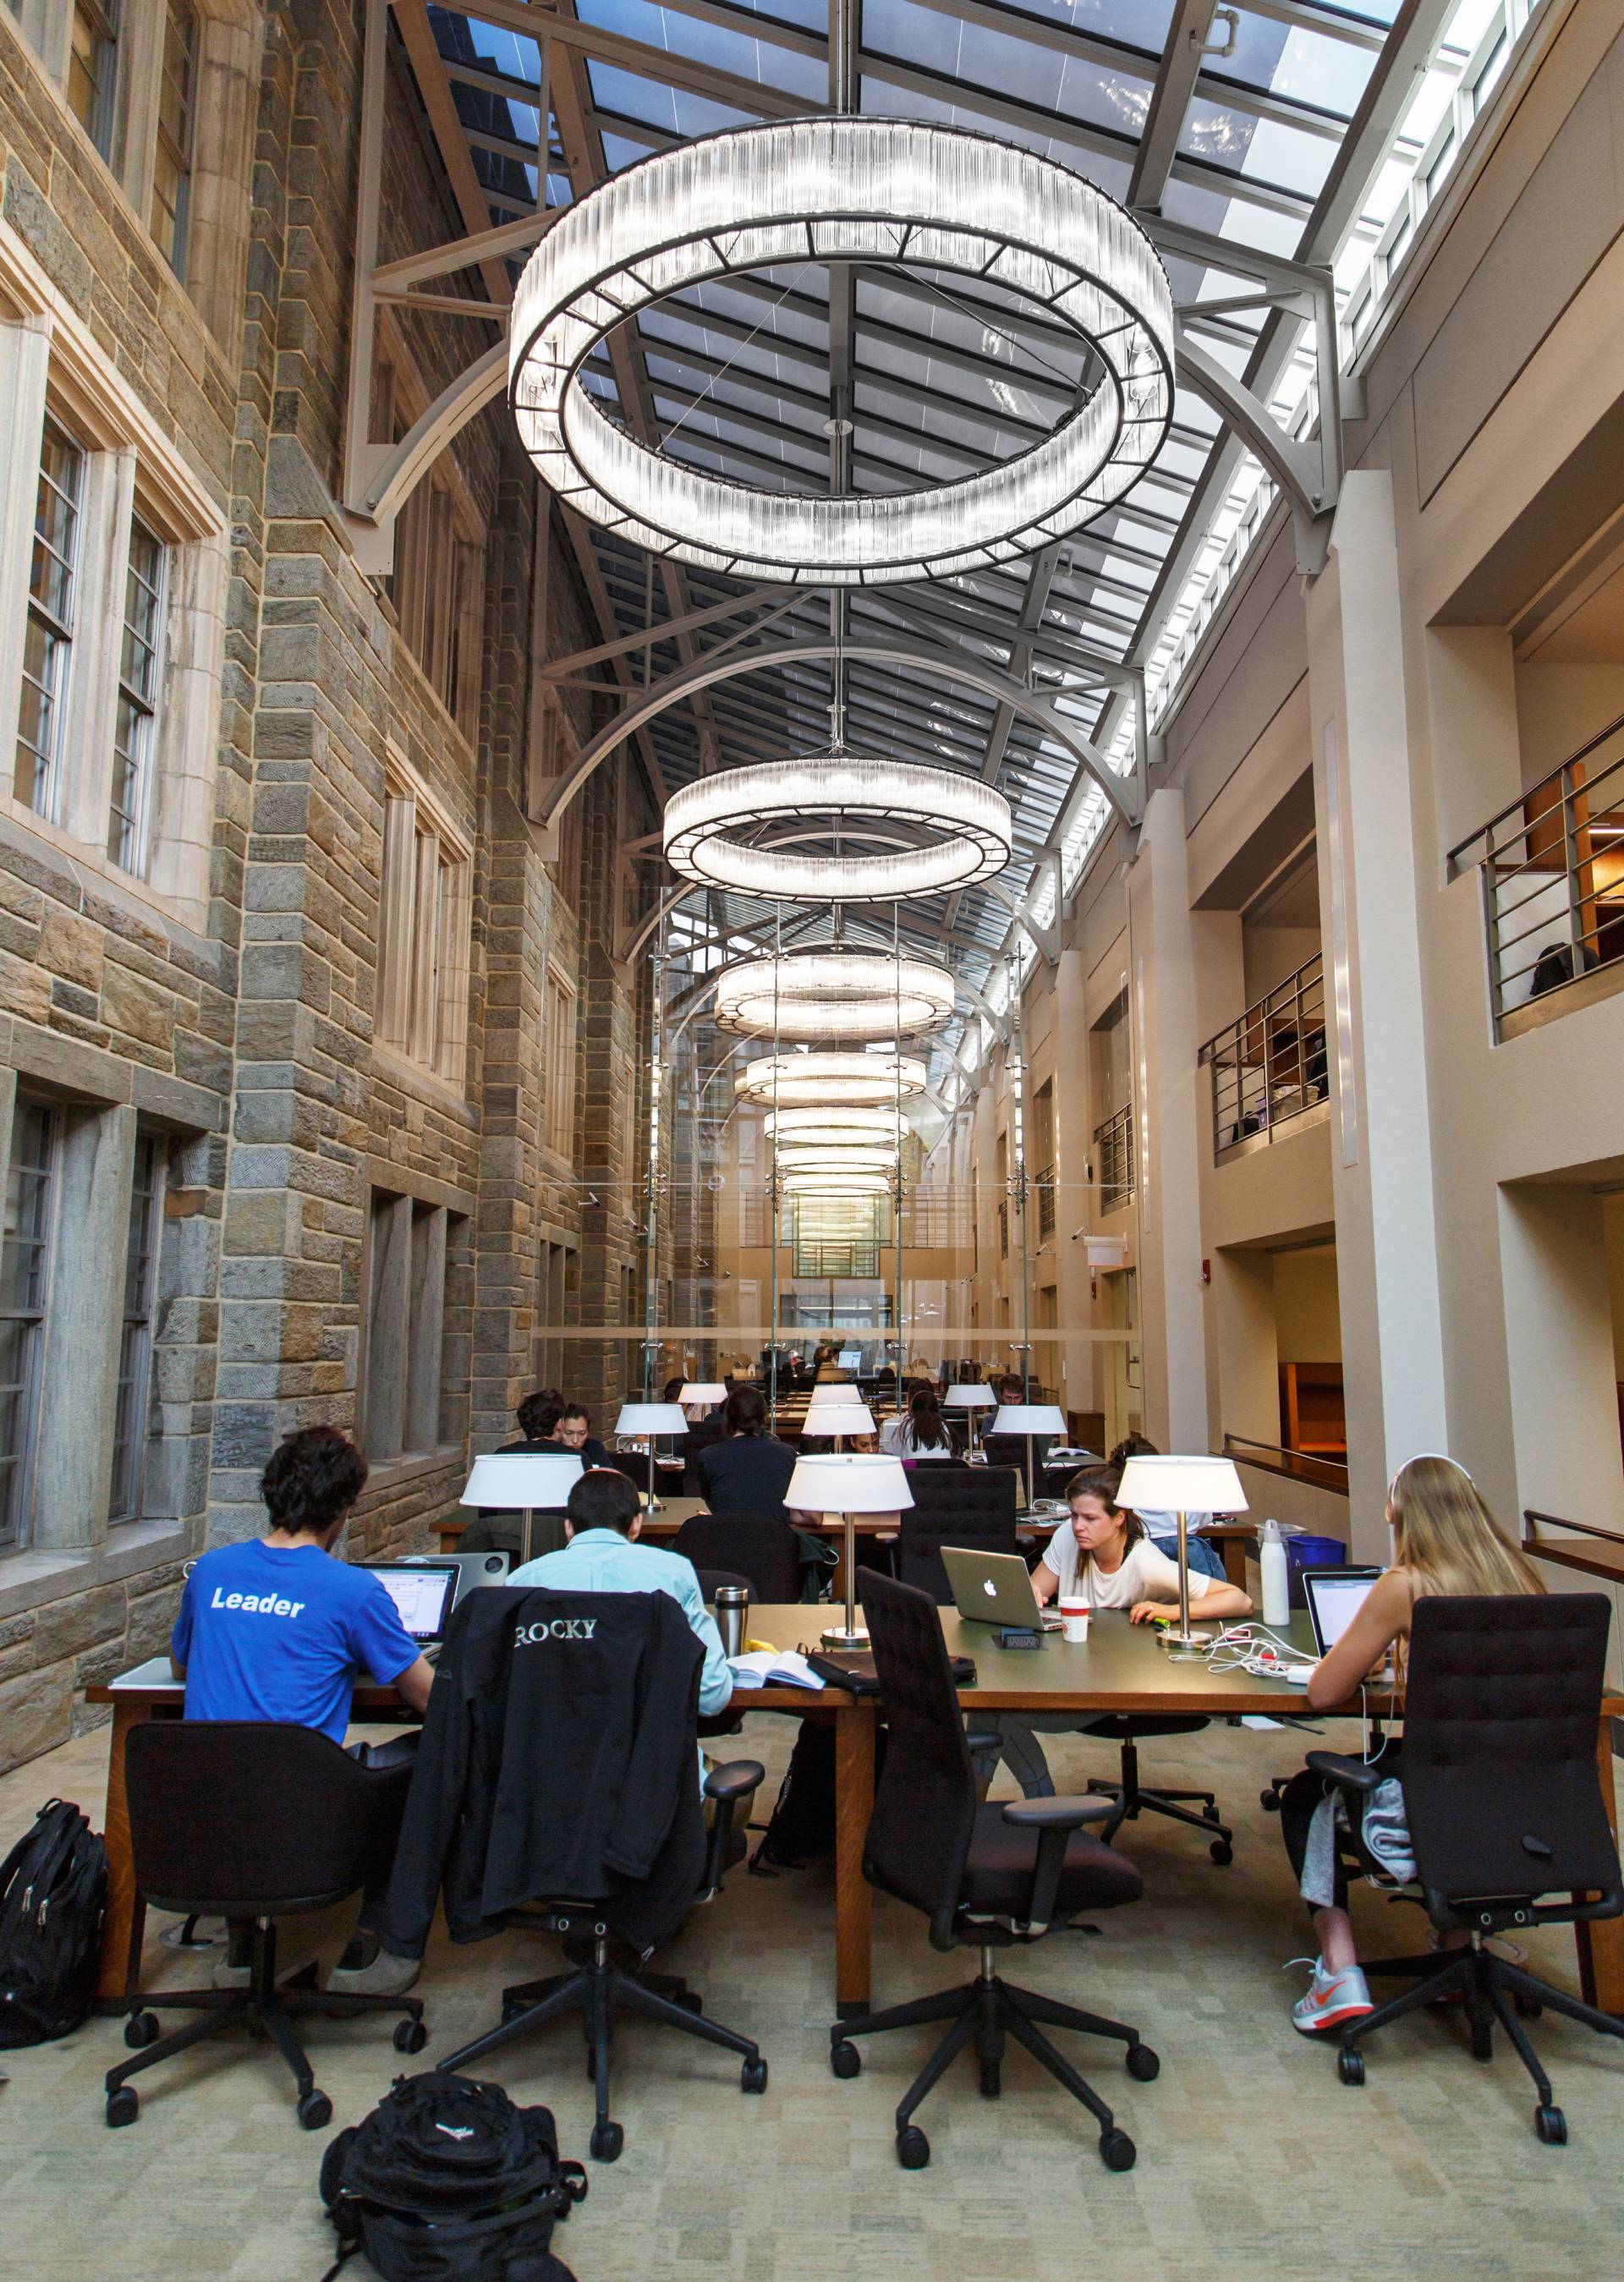 Students studying in library room